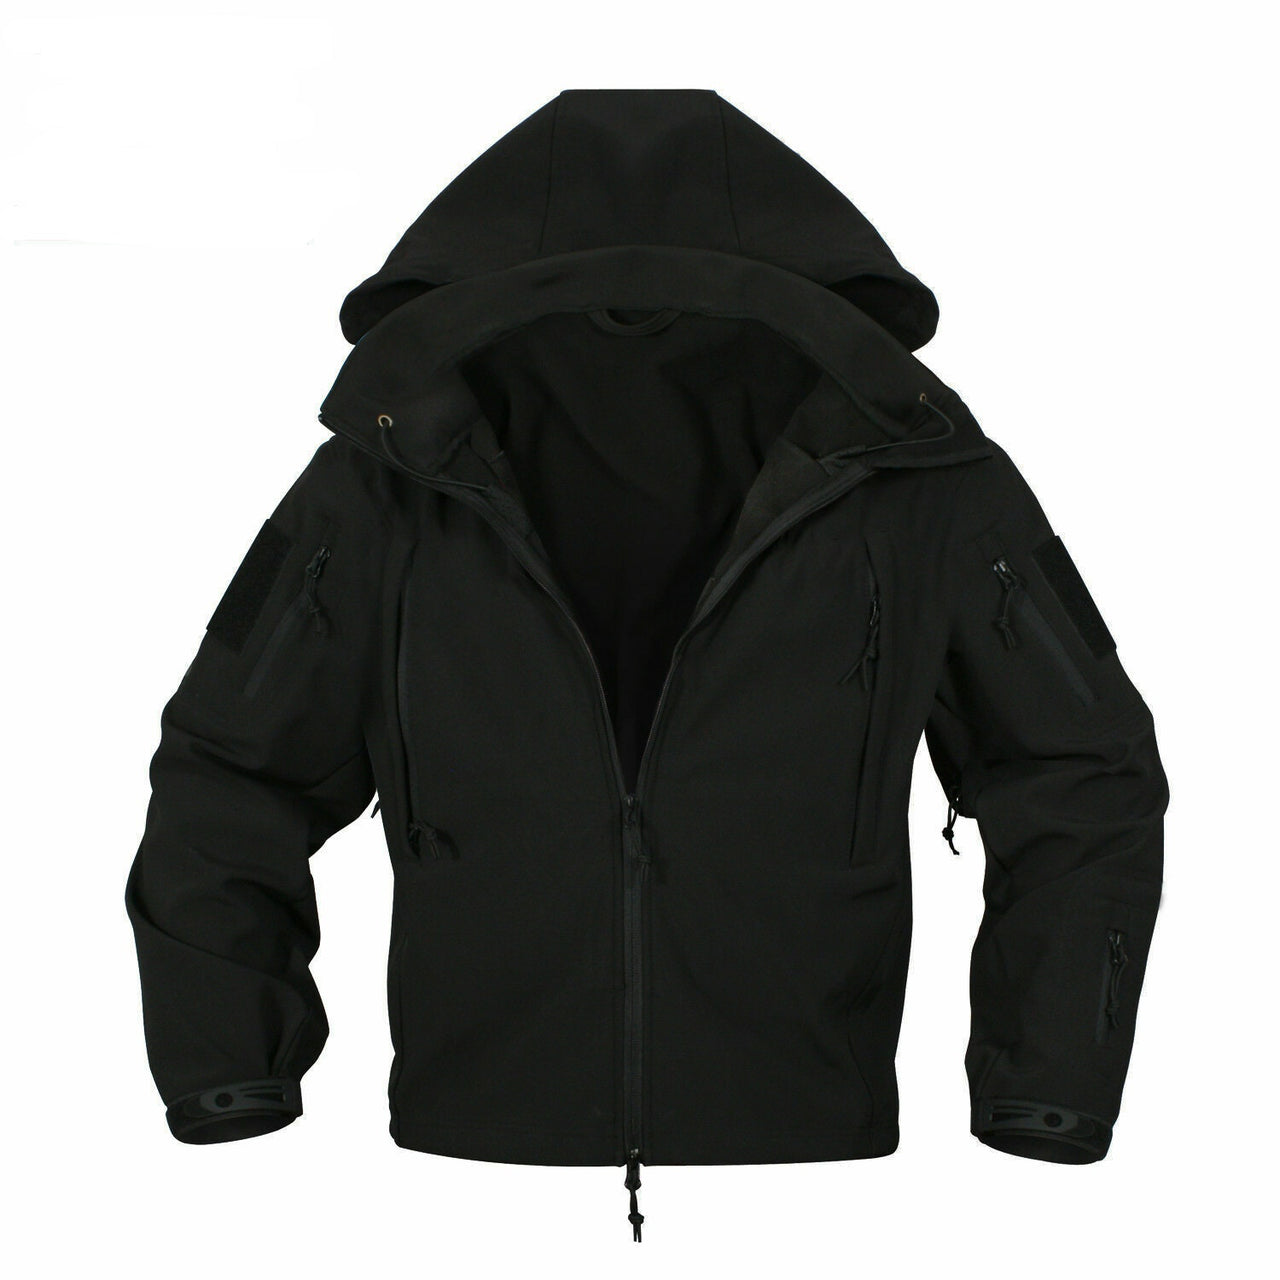 Cotopaxi Capa Hooded Insulated Jacket - Men's | REI Co-op